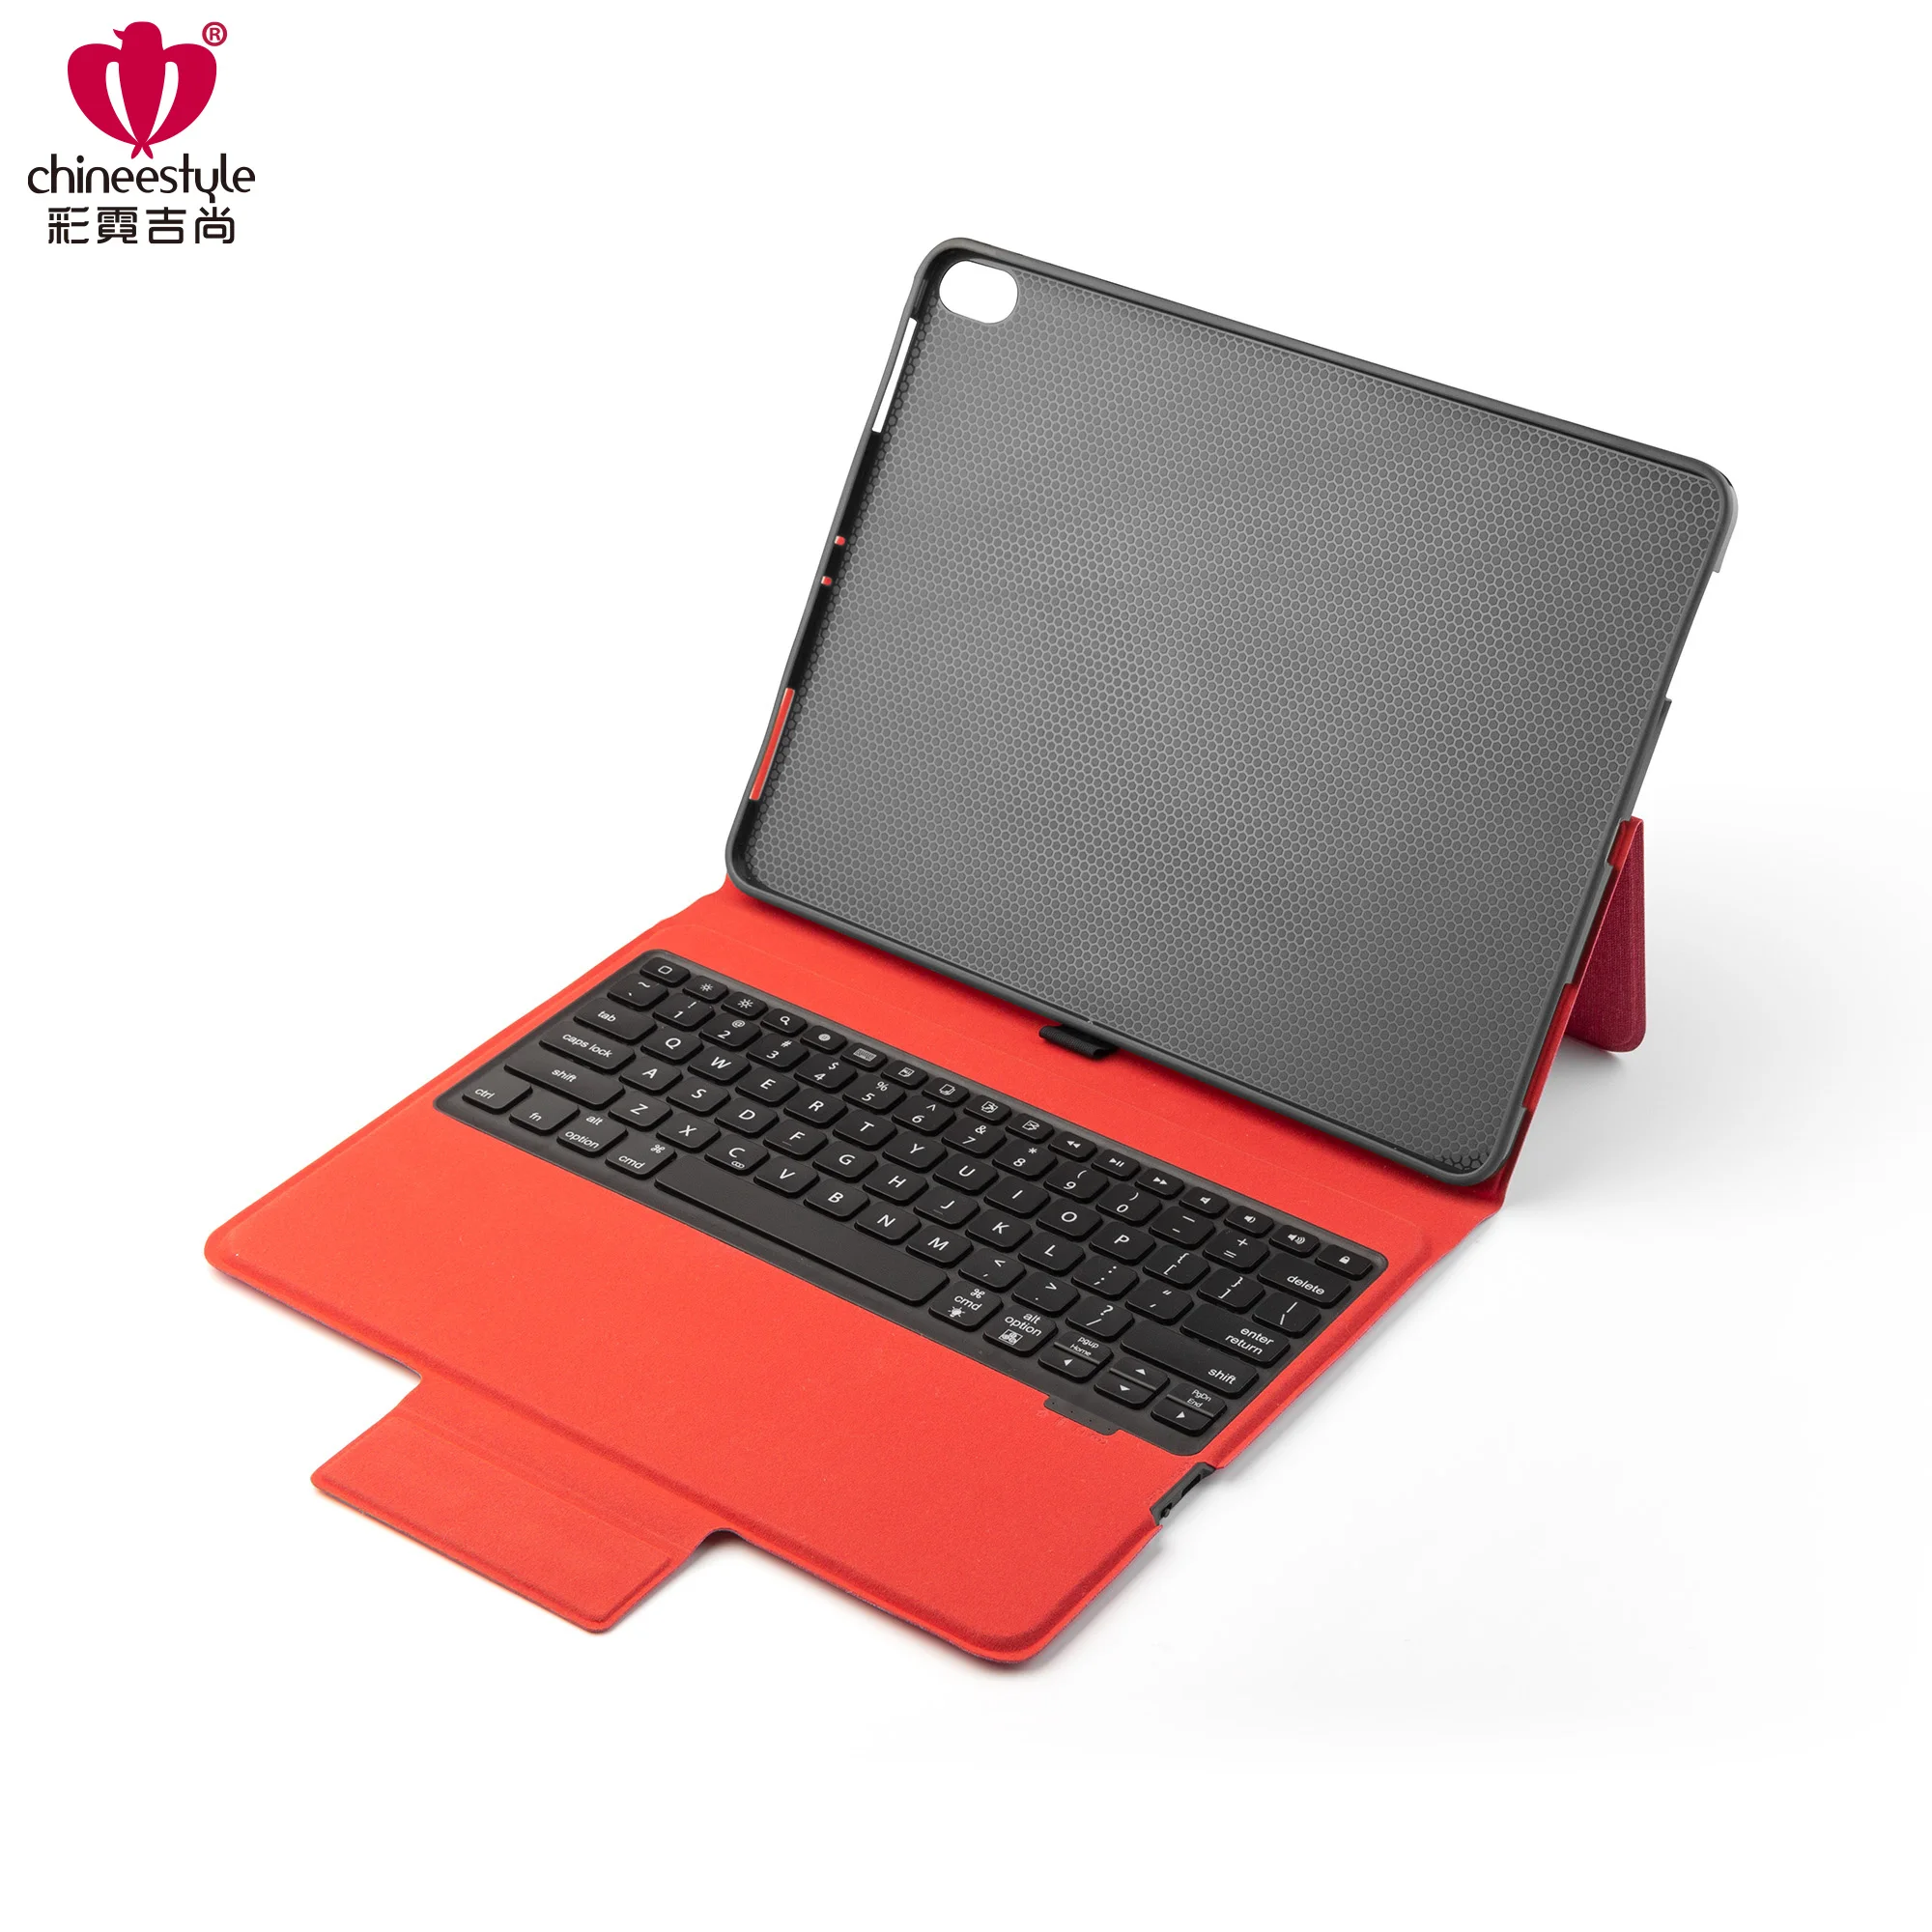 Light Fashionable Red Wireless Bluetooth Keyboard Case For Ipad Mini 5 Keyboard Case Buy For Ipad Mini 5 Keyboard Case Ipad Mini 5 Keyboard Case Ipad Mini Case With Keyboard Product On Alibaba Com